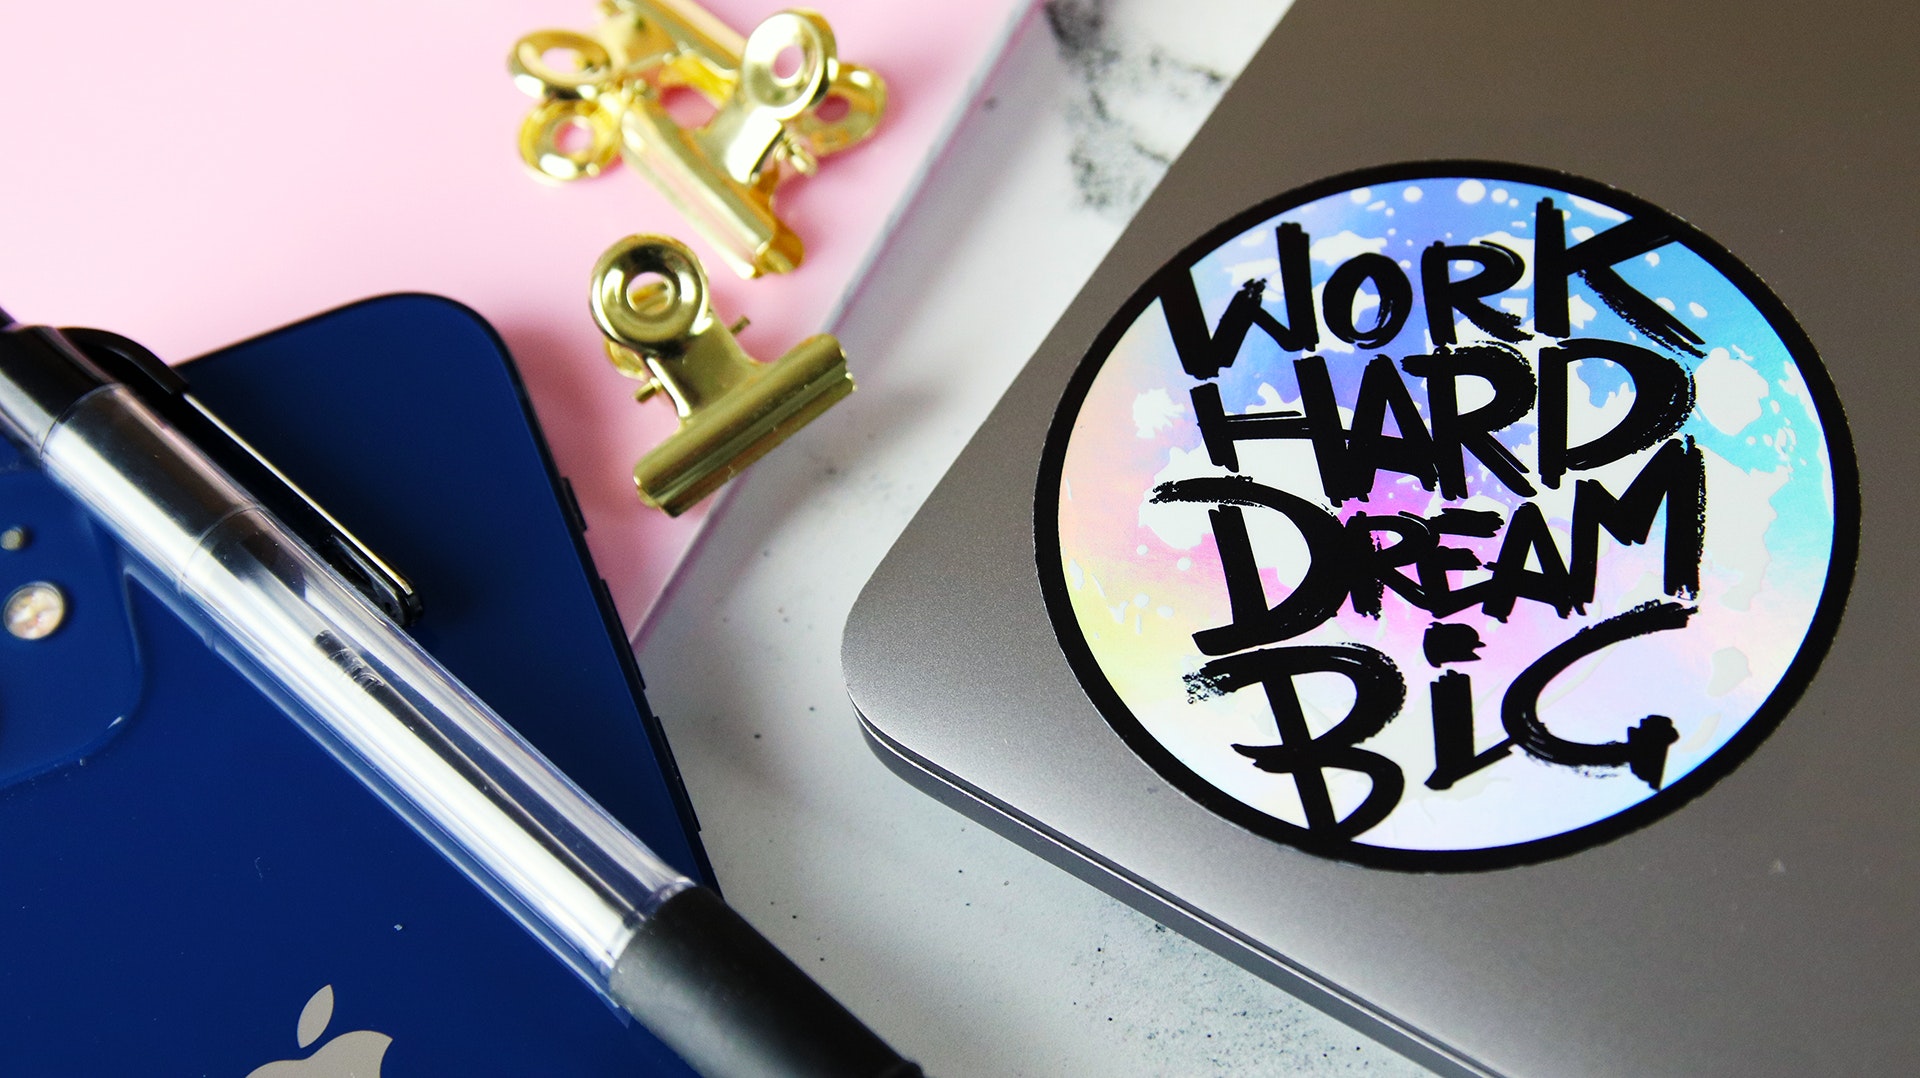 Circle holographic sticker with work hard dream big design applied to a silver laptop